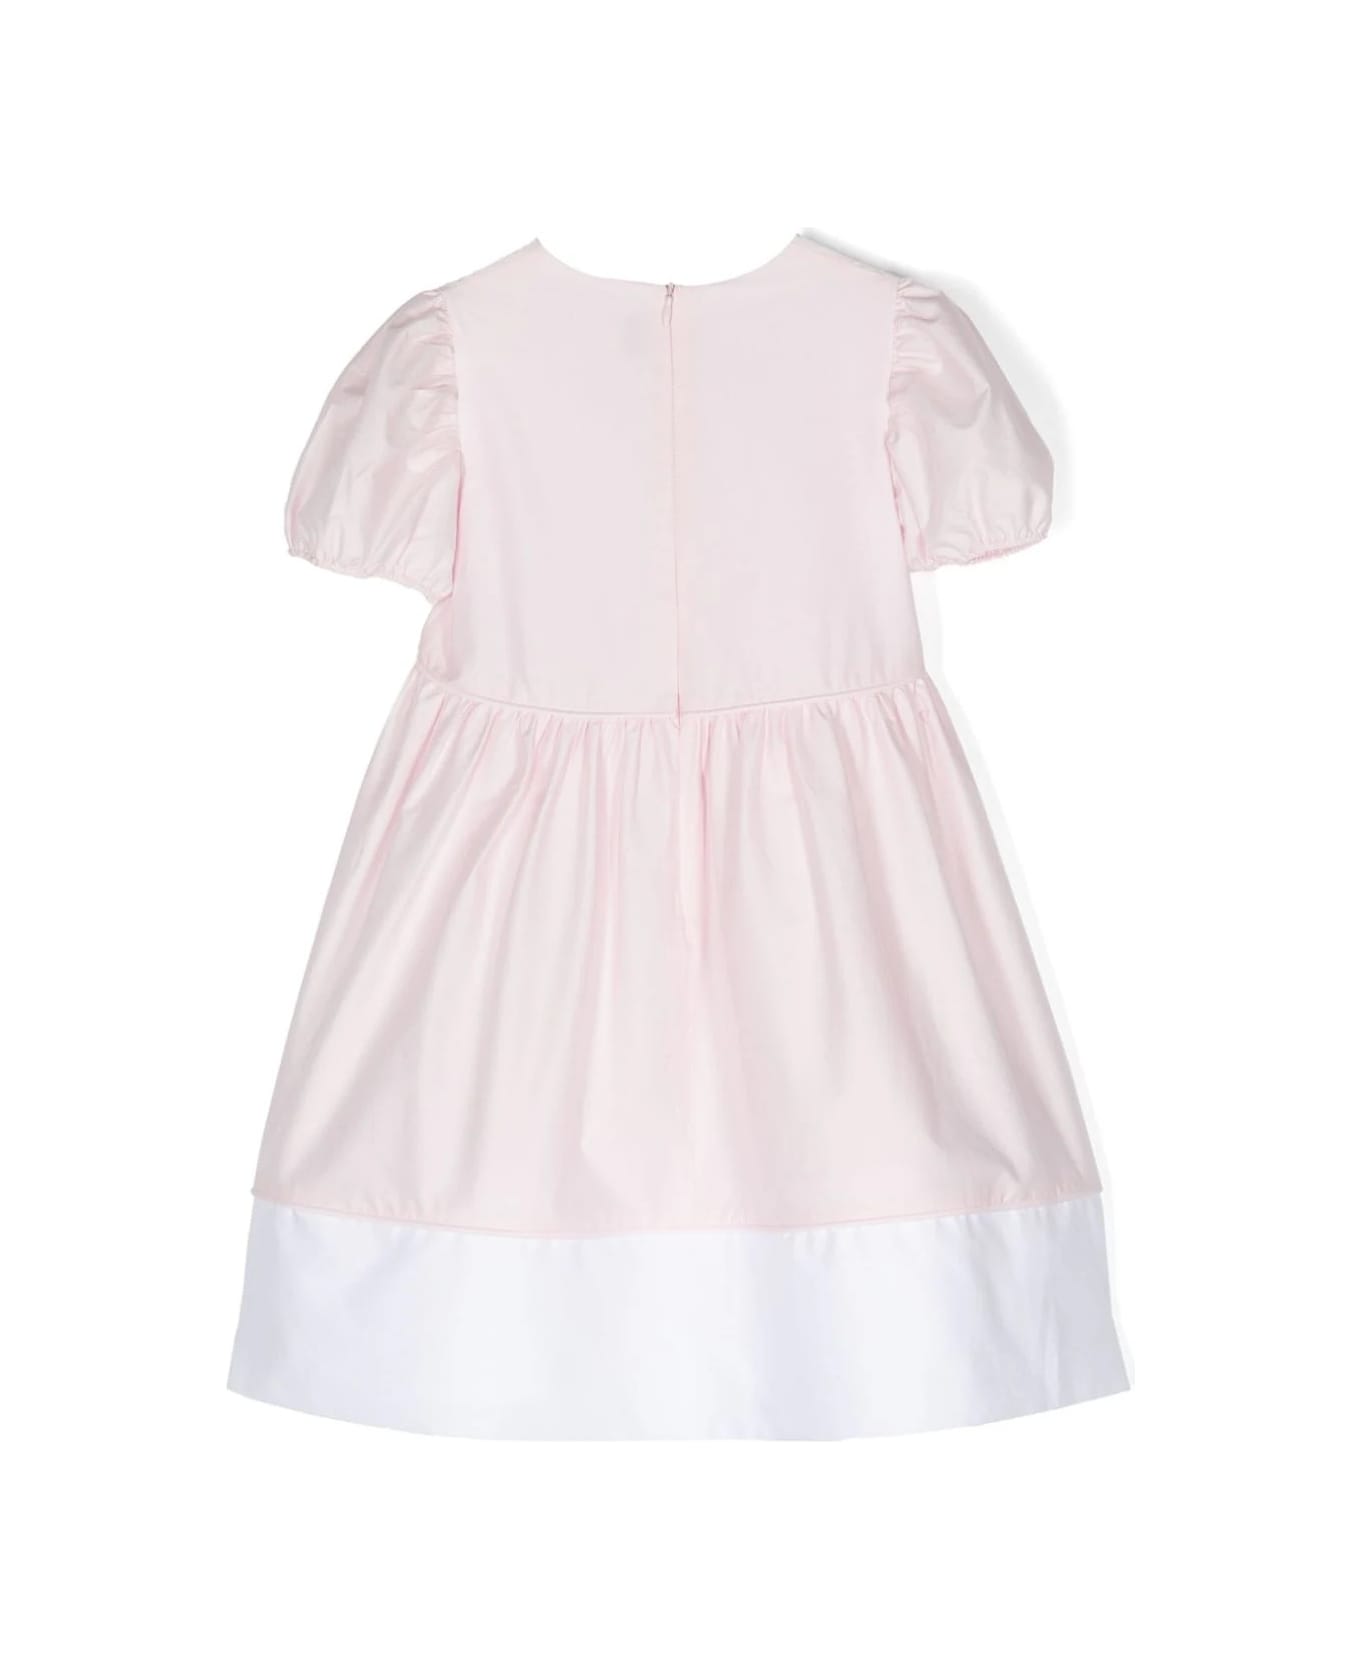 Il Gufo Short-sleeved Dress In Pink And White Stretch Poplin - Pink